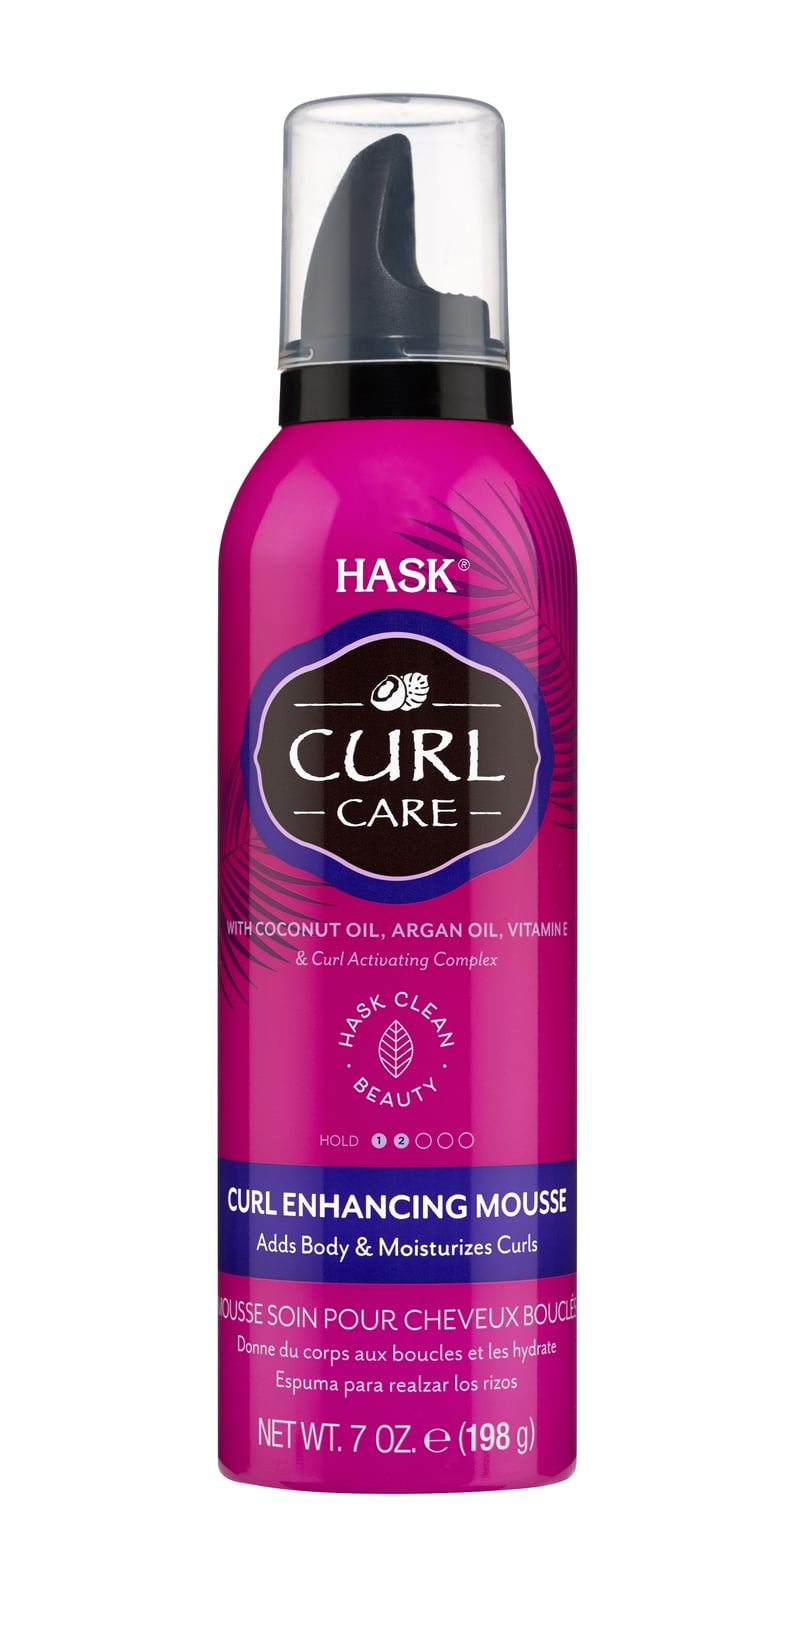 Hask Curl Care Curl Enhancing Mousse